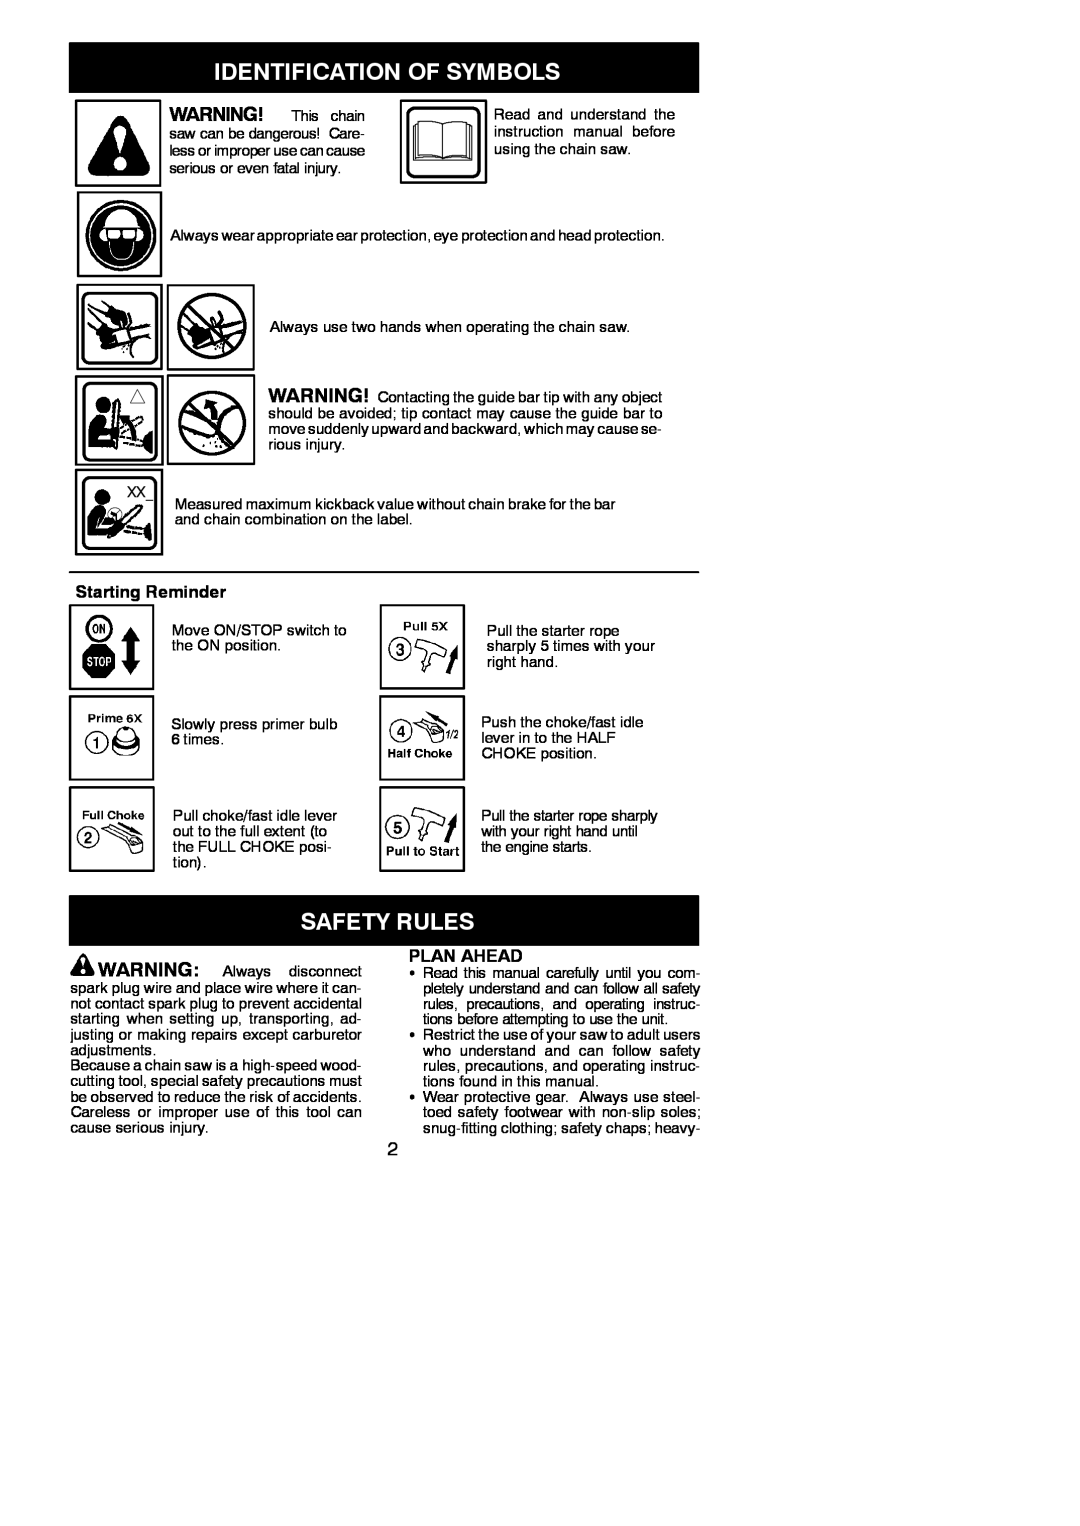 Poulan 966063101 instruction manual Identification Of Symbols, Safety Rules, Starting Reminder, Plan Ahead 